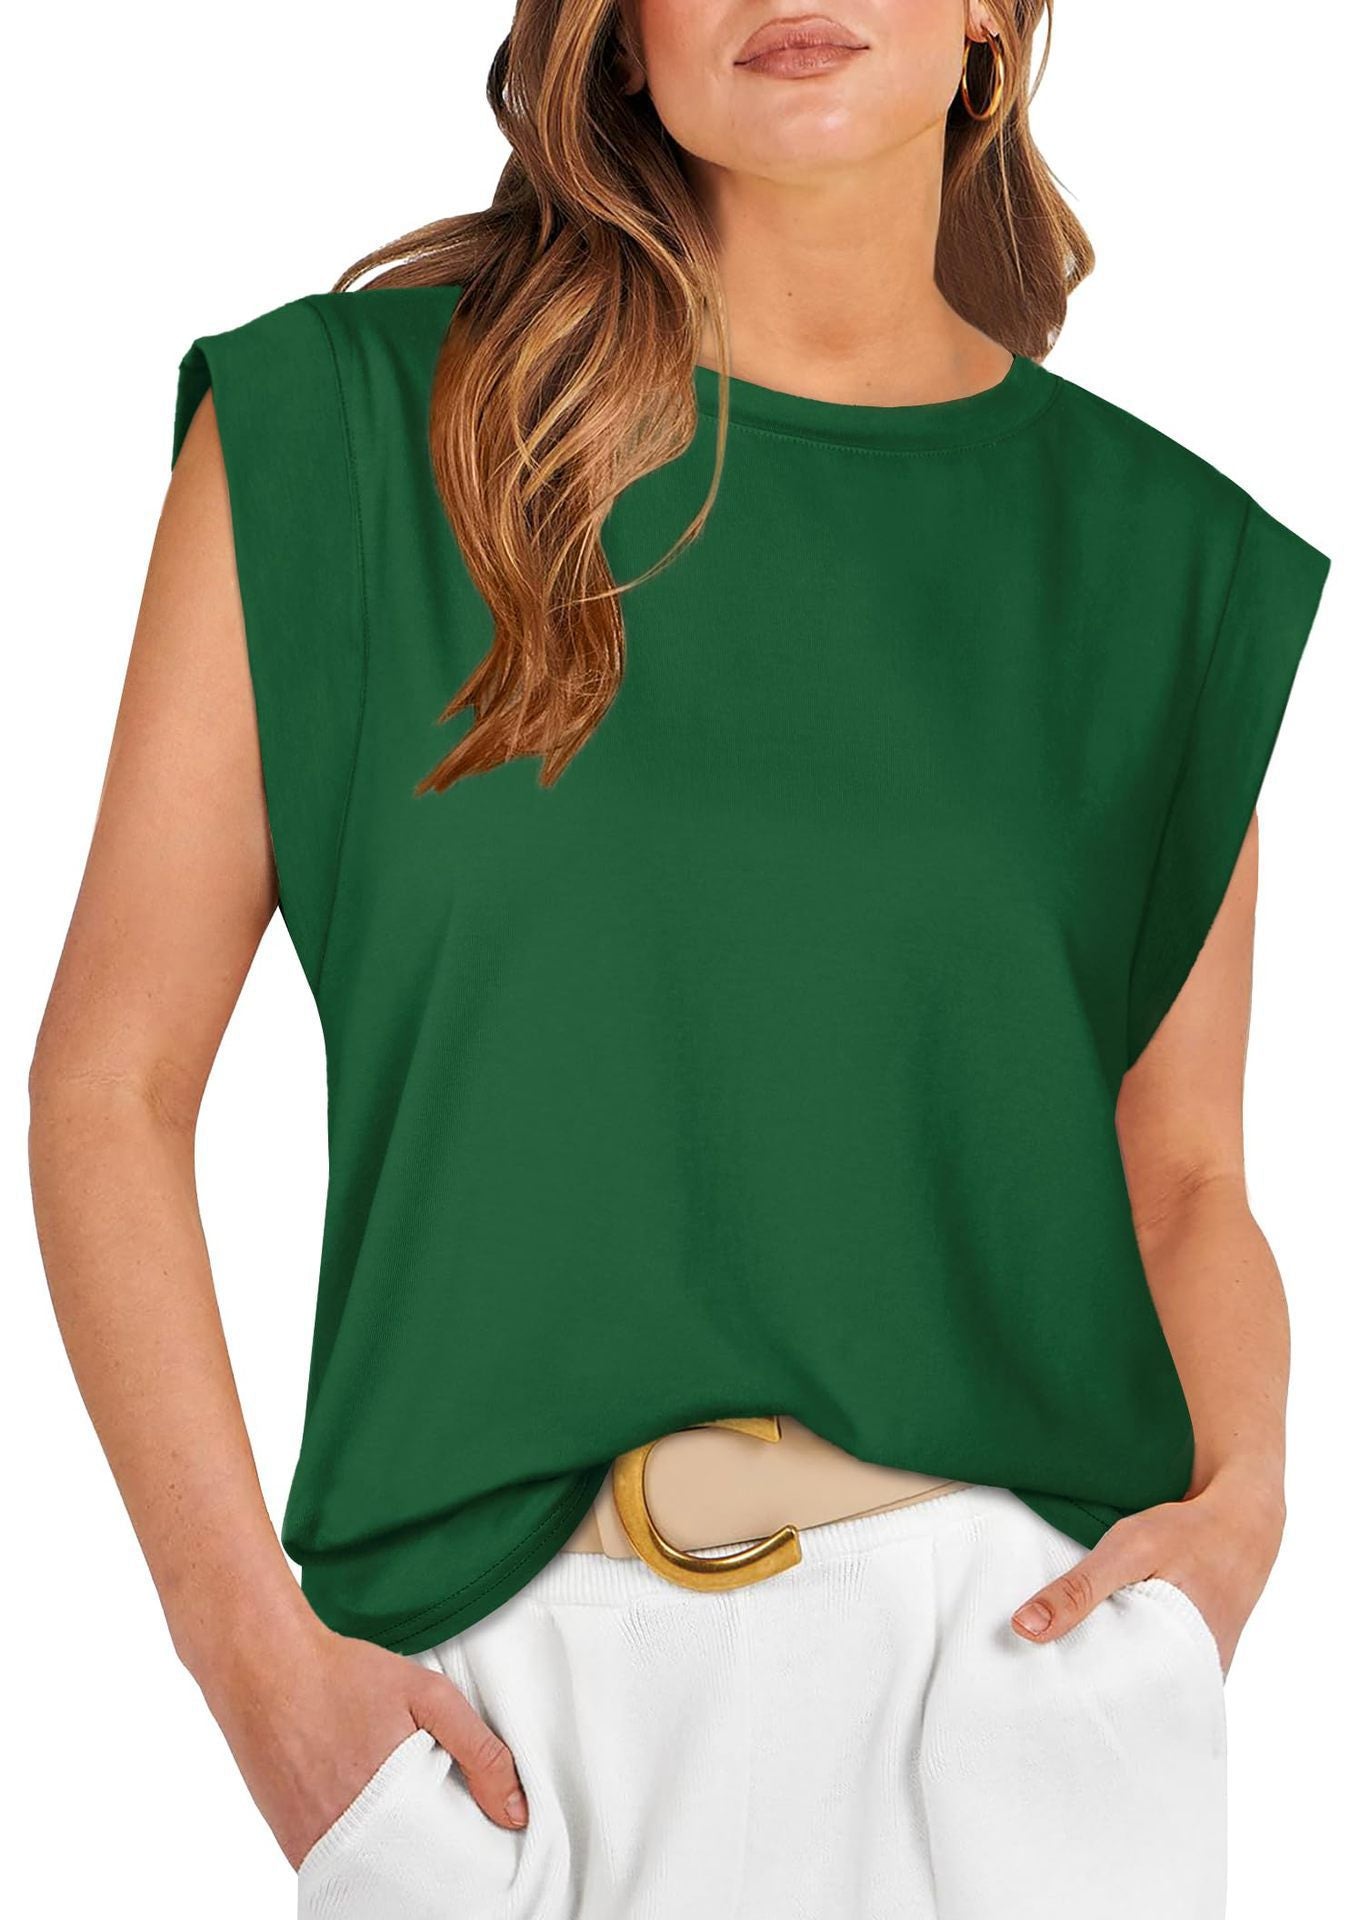 Women's Two-piece Round Neck T-shirt Summer Casual Blouses